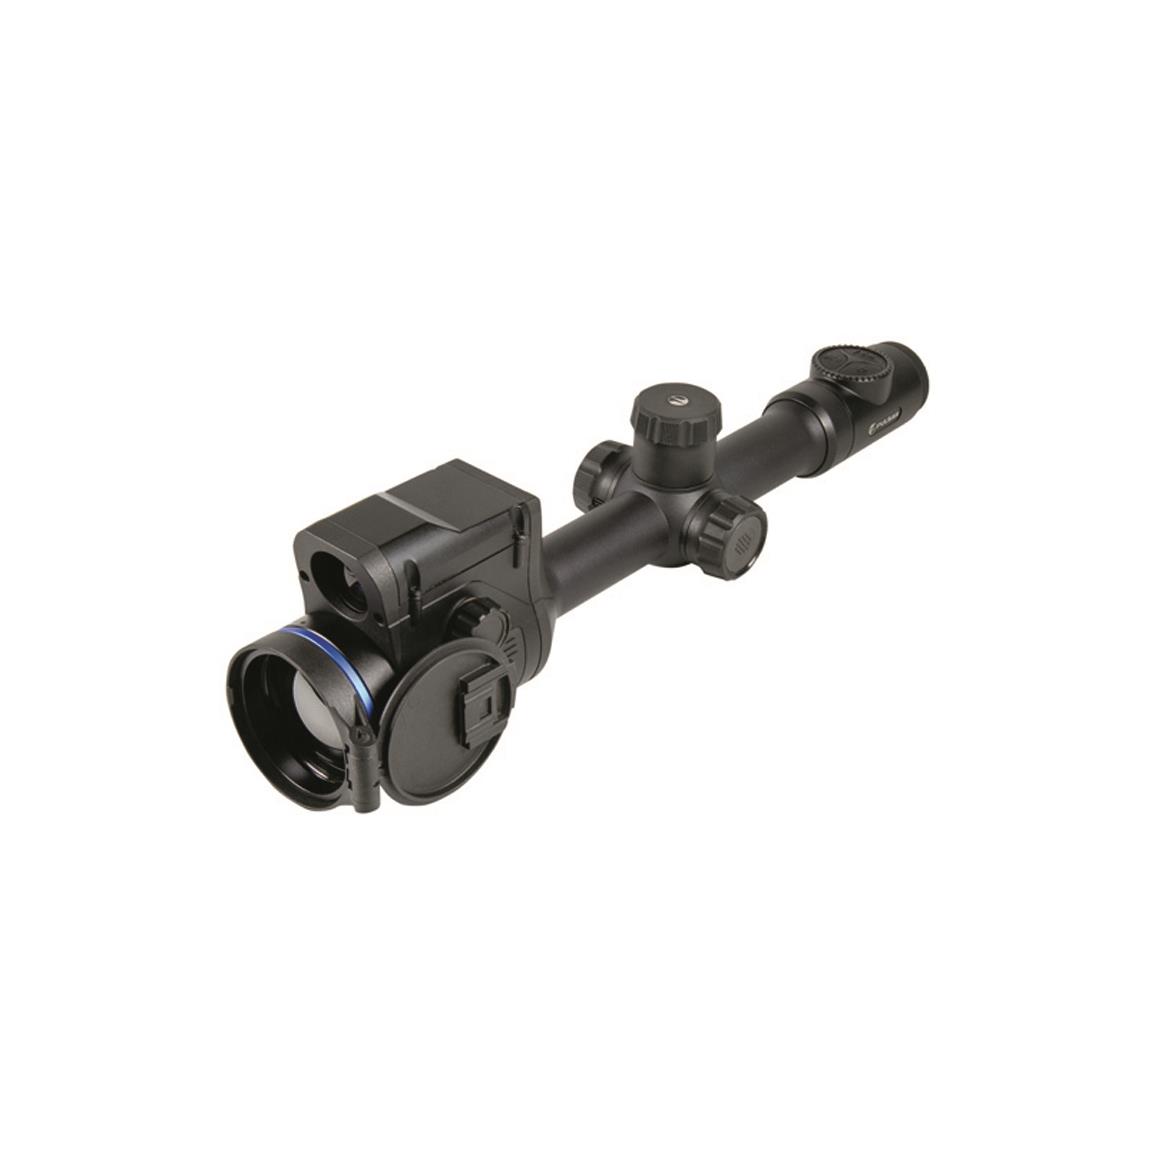 Pulsar Thermion 2 LRF XQ50 3-12x Pro Thermal Rifle Scope with Rangefinder